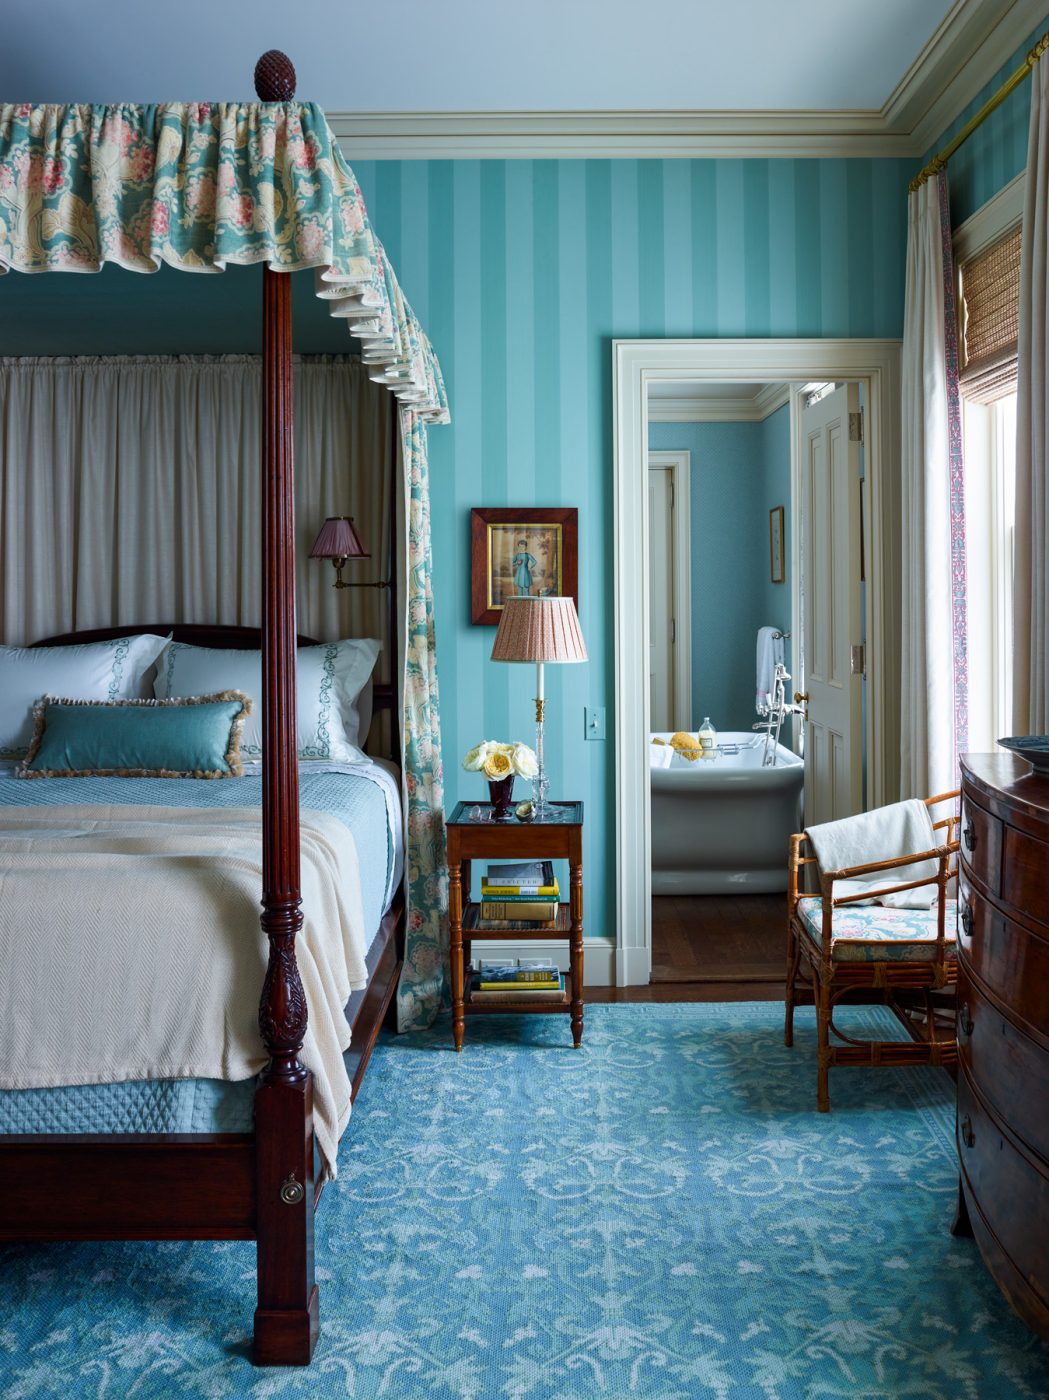 Primary bedroom in Dutchess County New York Regency-style home by architect Gil Schafer III in his new book Home at Last: Enduring Design for the New American Home Rizzoli publisher written with Mark Kristal Thomas Jayne interior design